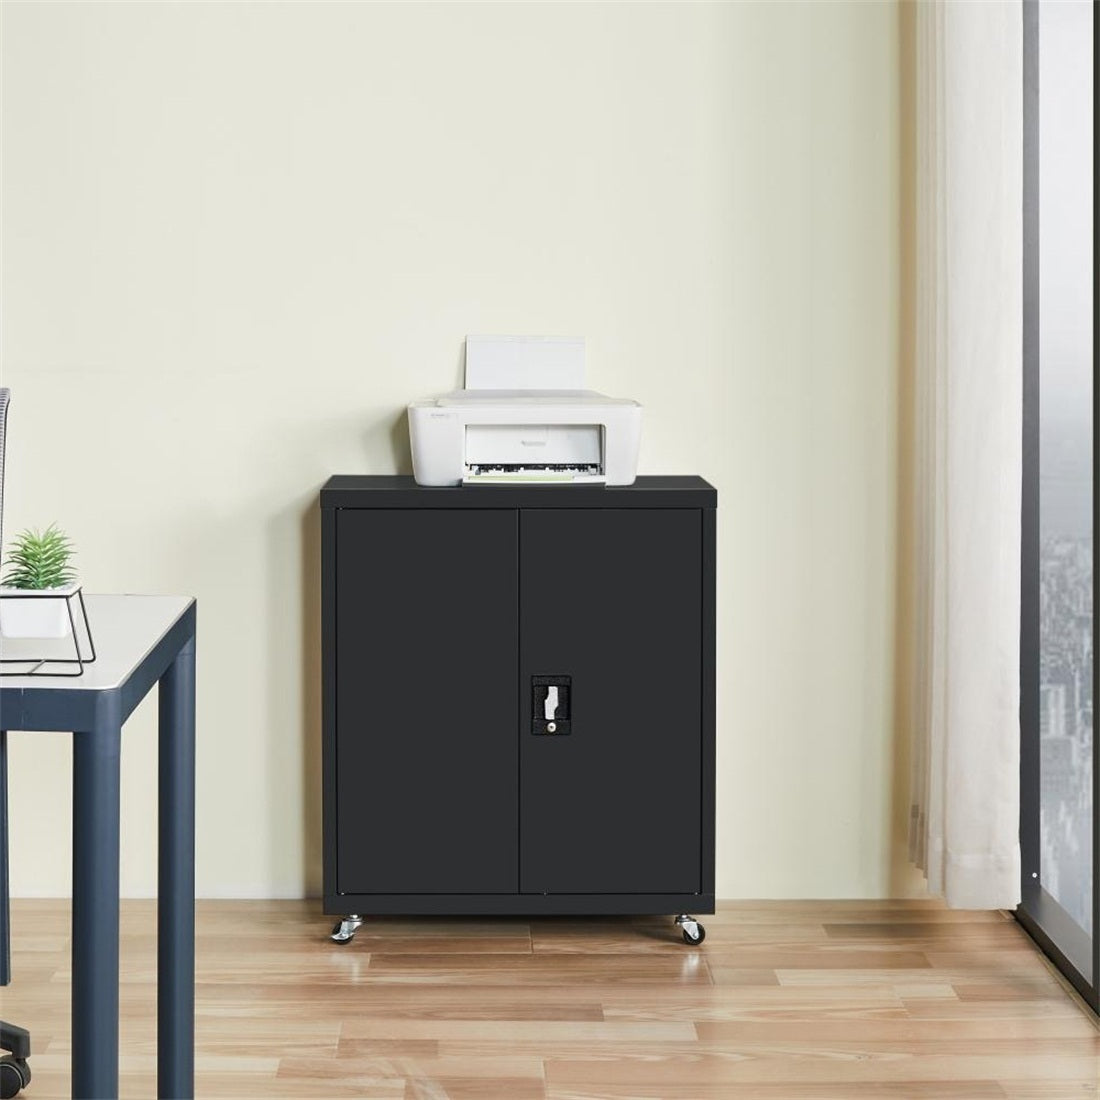 1-Shelf Metal Filing Cabinet with Lock for Home and Office Storage